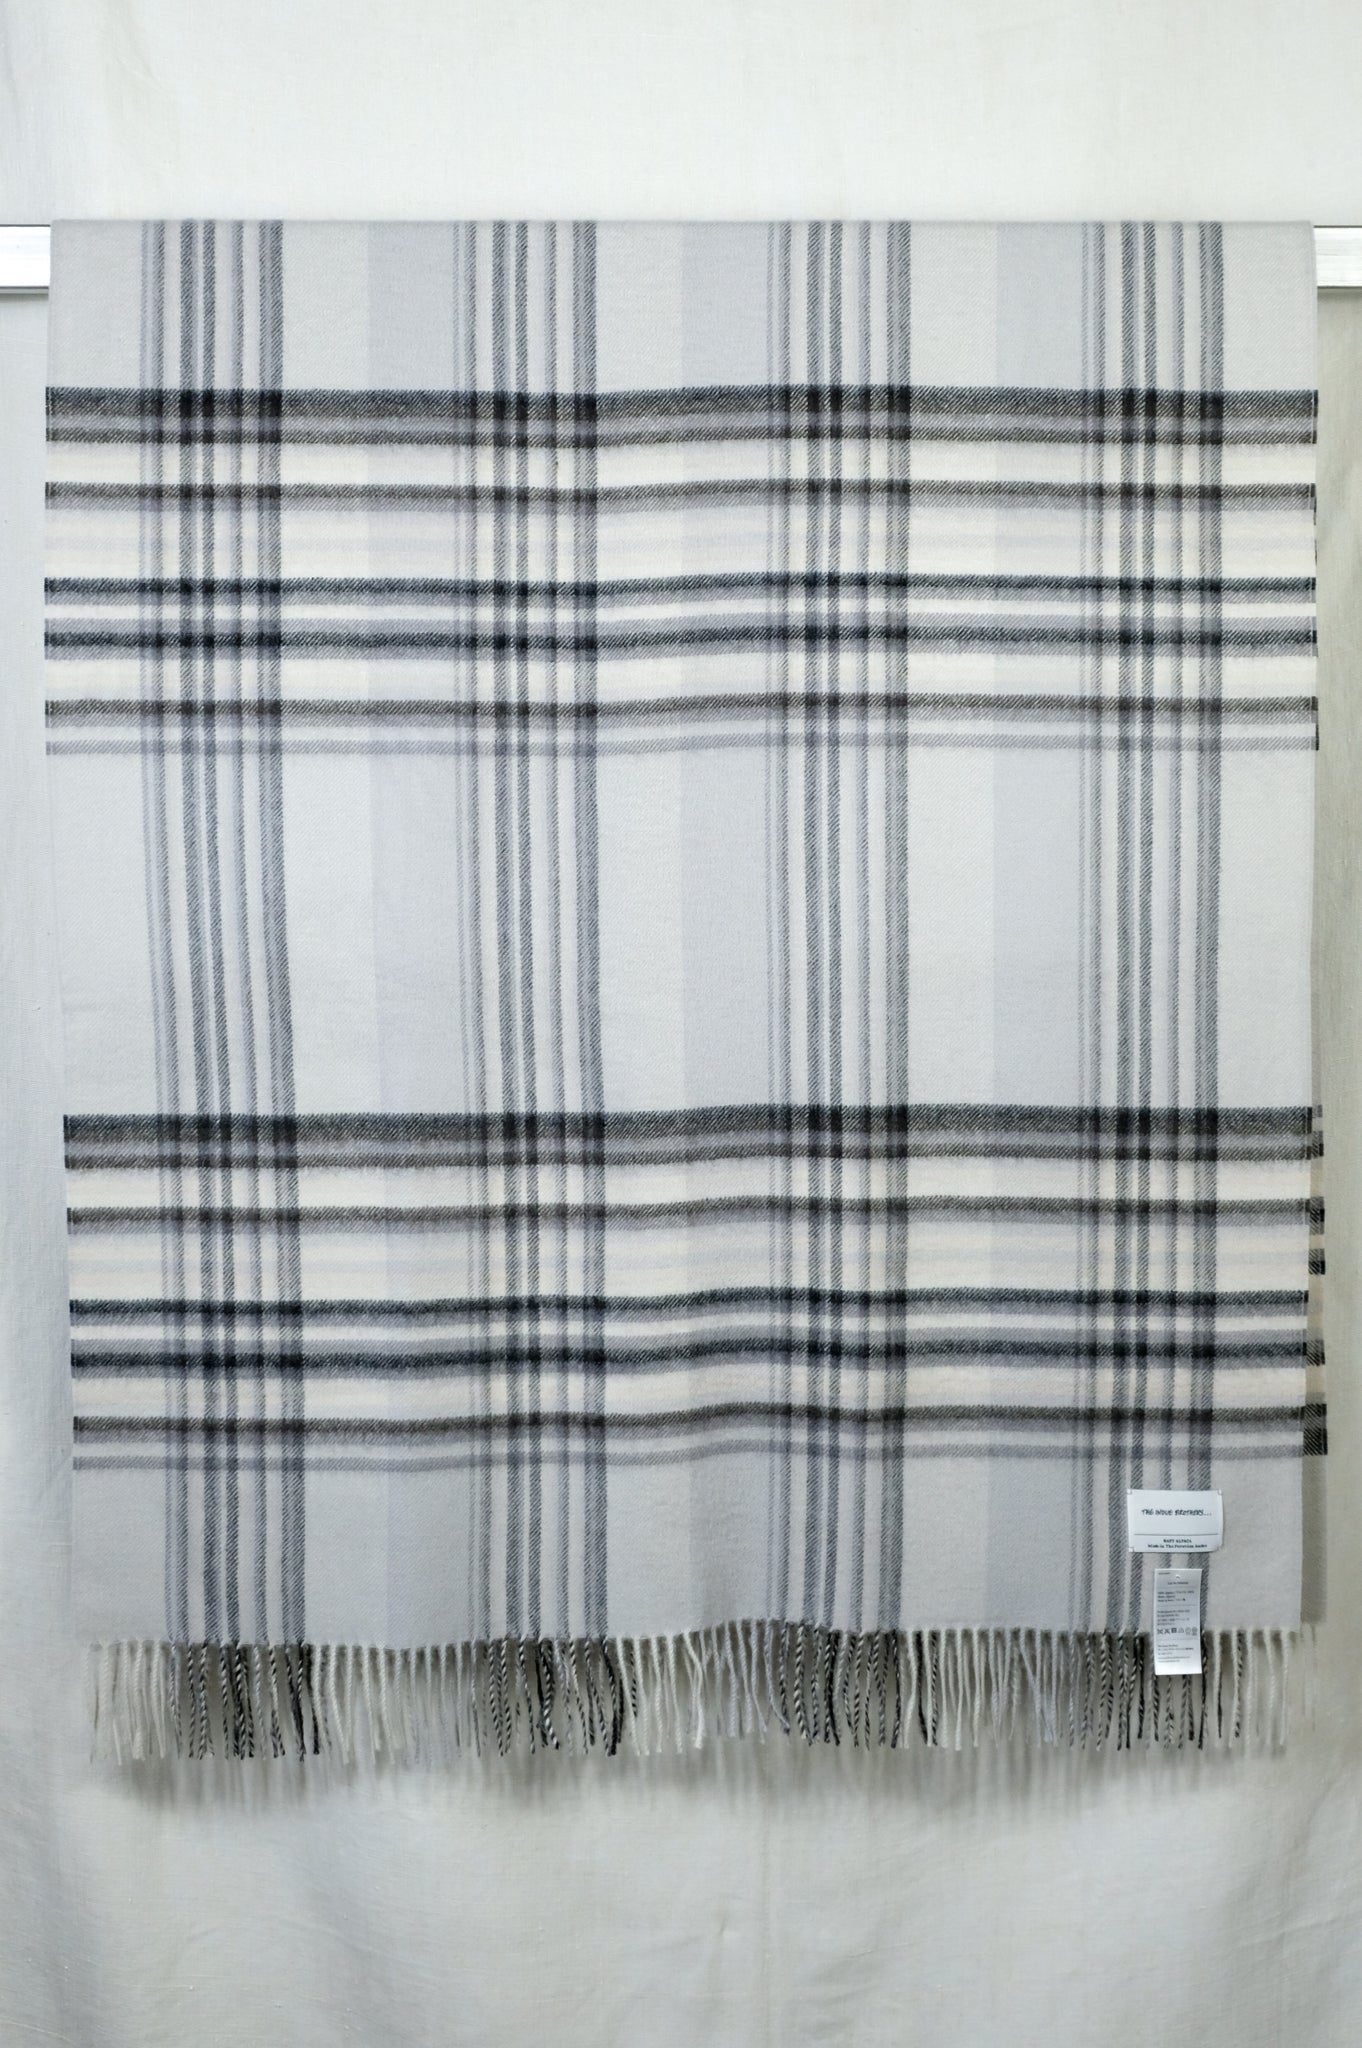 THE INOUE BROTHERS..."Large Brushed Stole (pattern) / Checkered Grey"